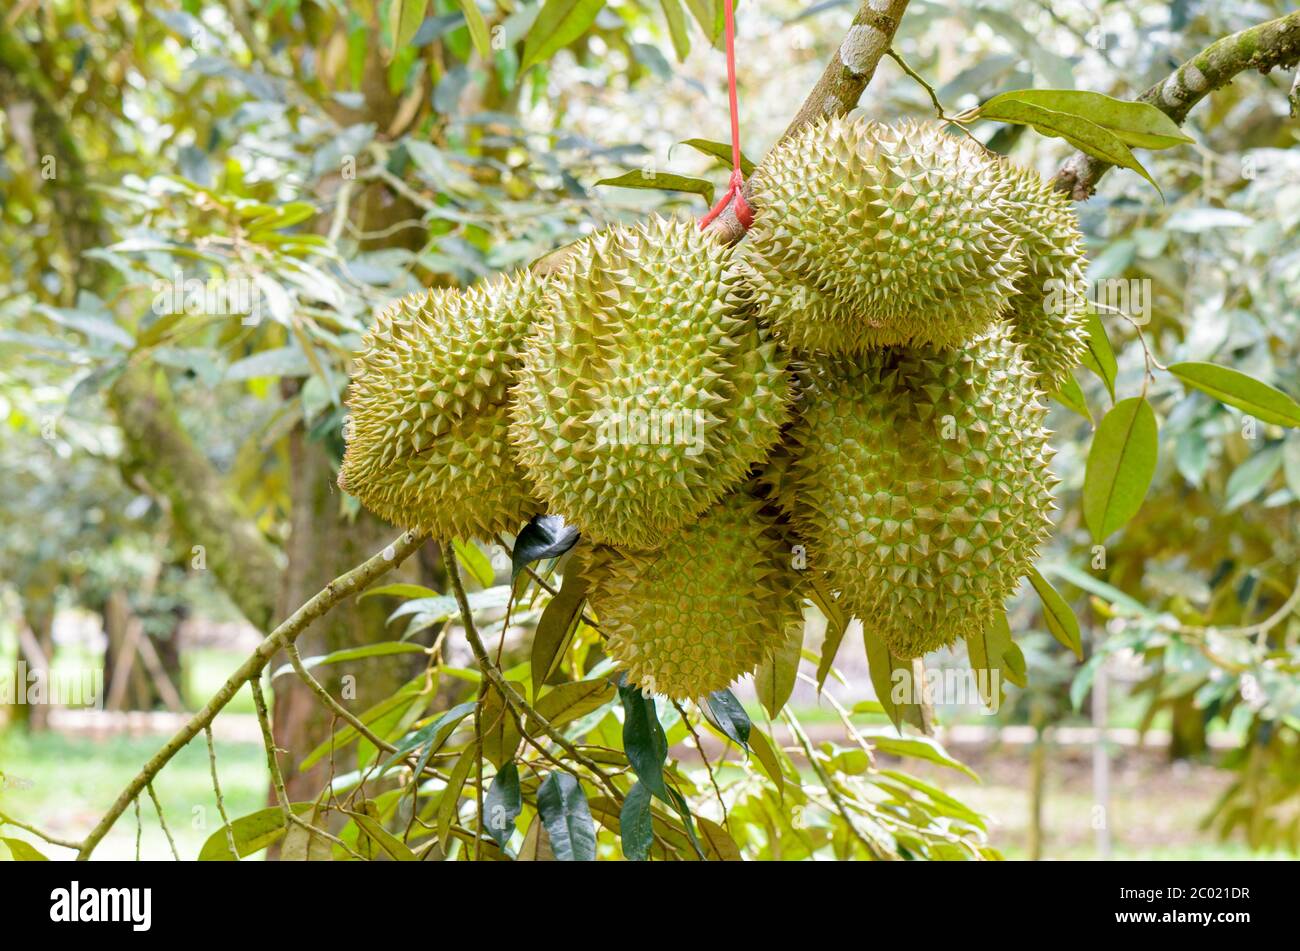 Durian on tree King of fruits in Thailand Stock Photo